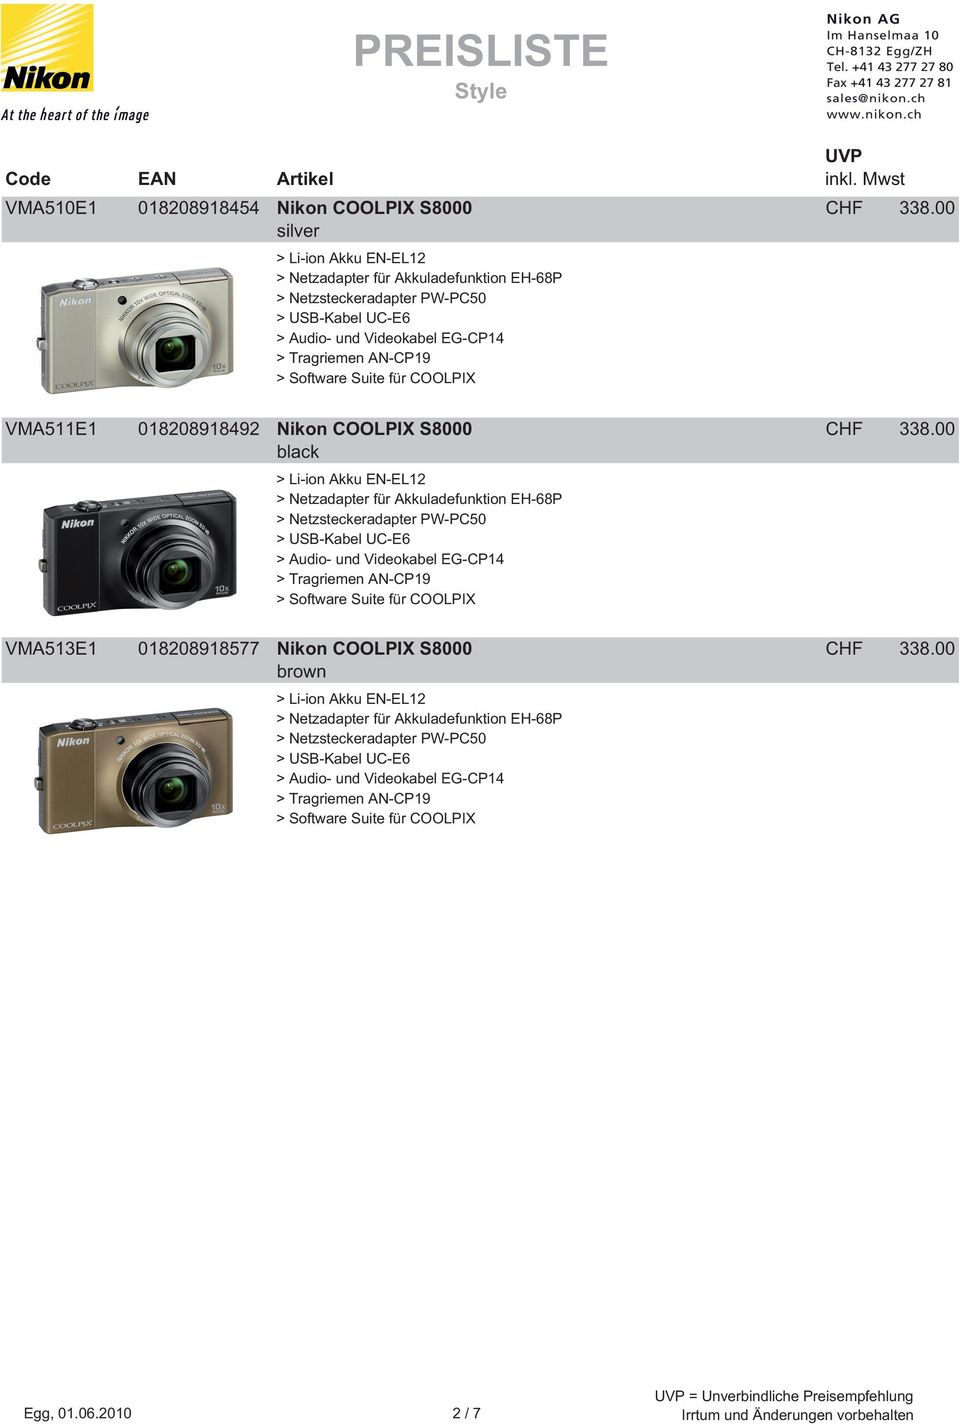 COOLPIX S8000 CHF 338.